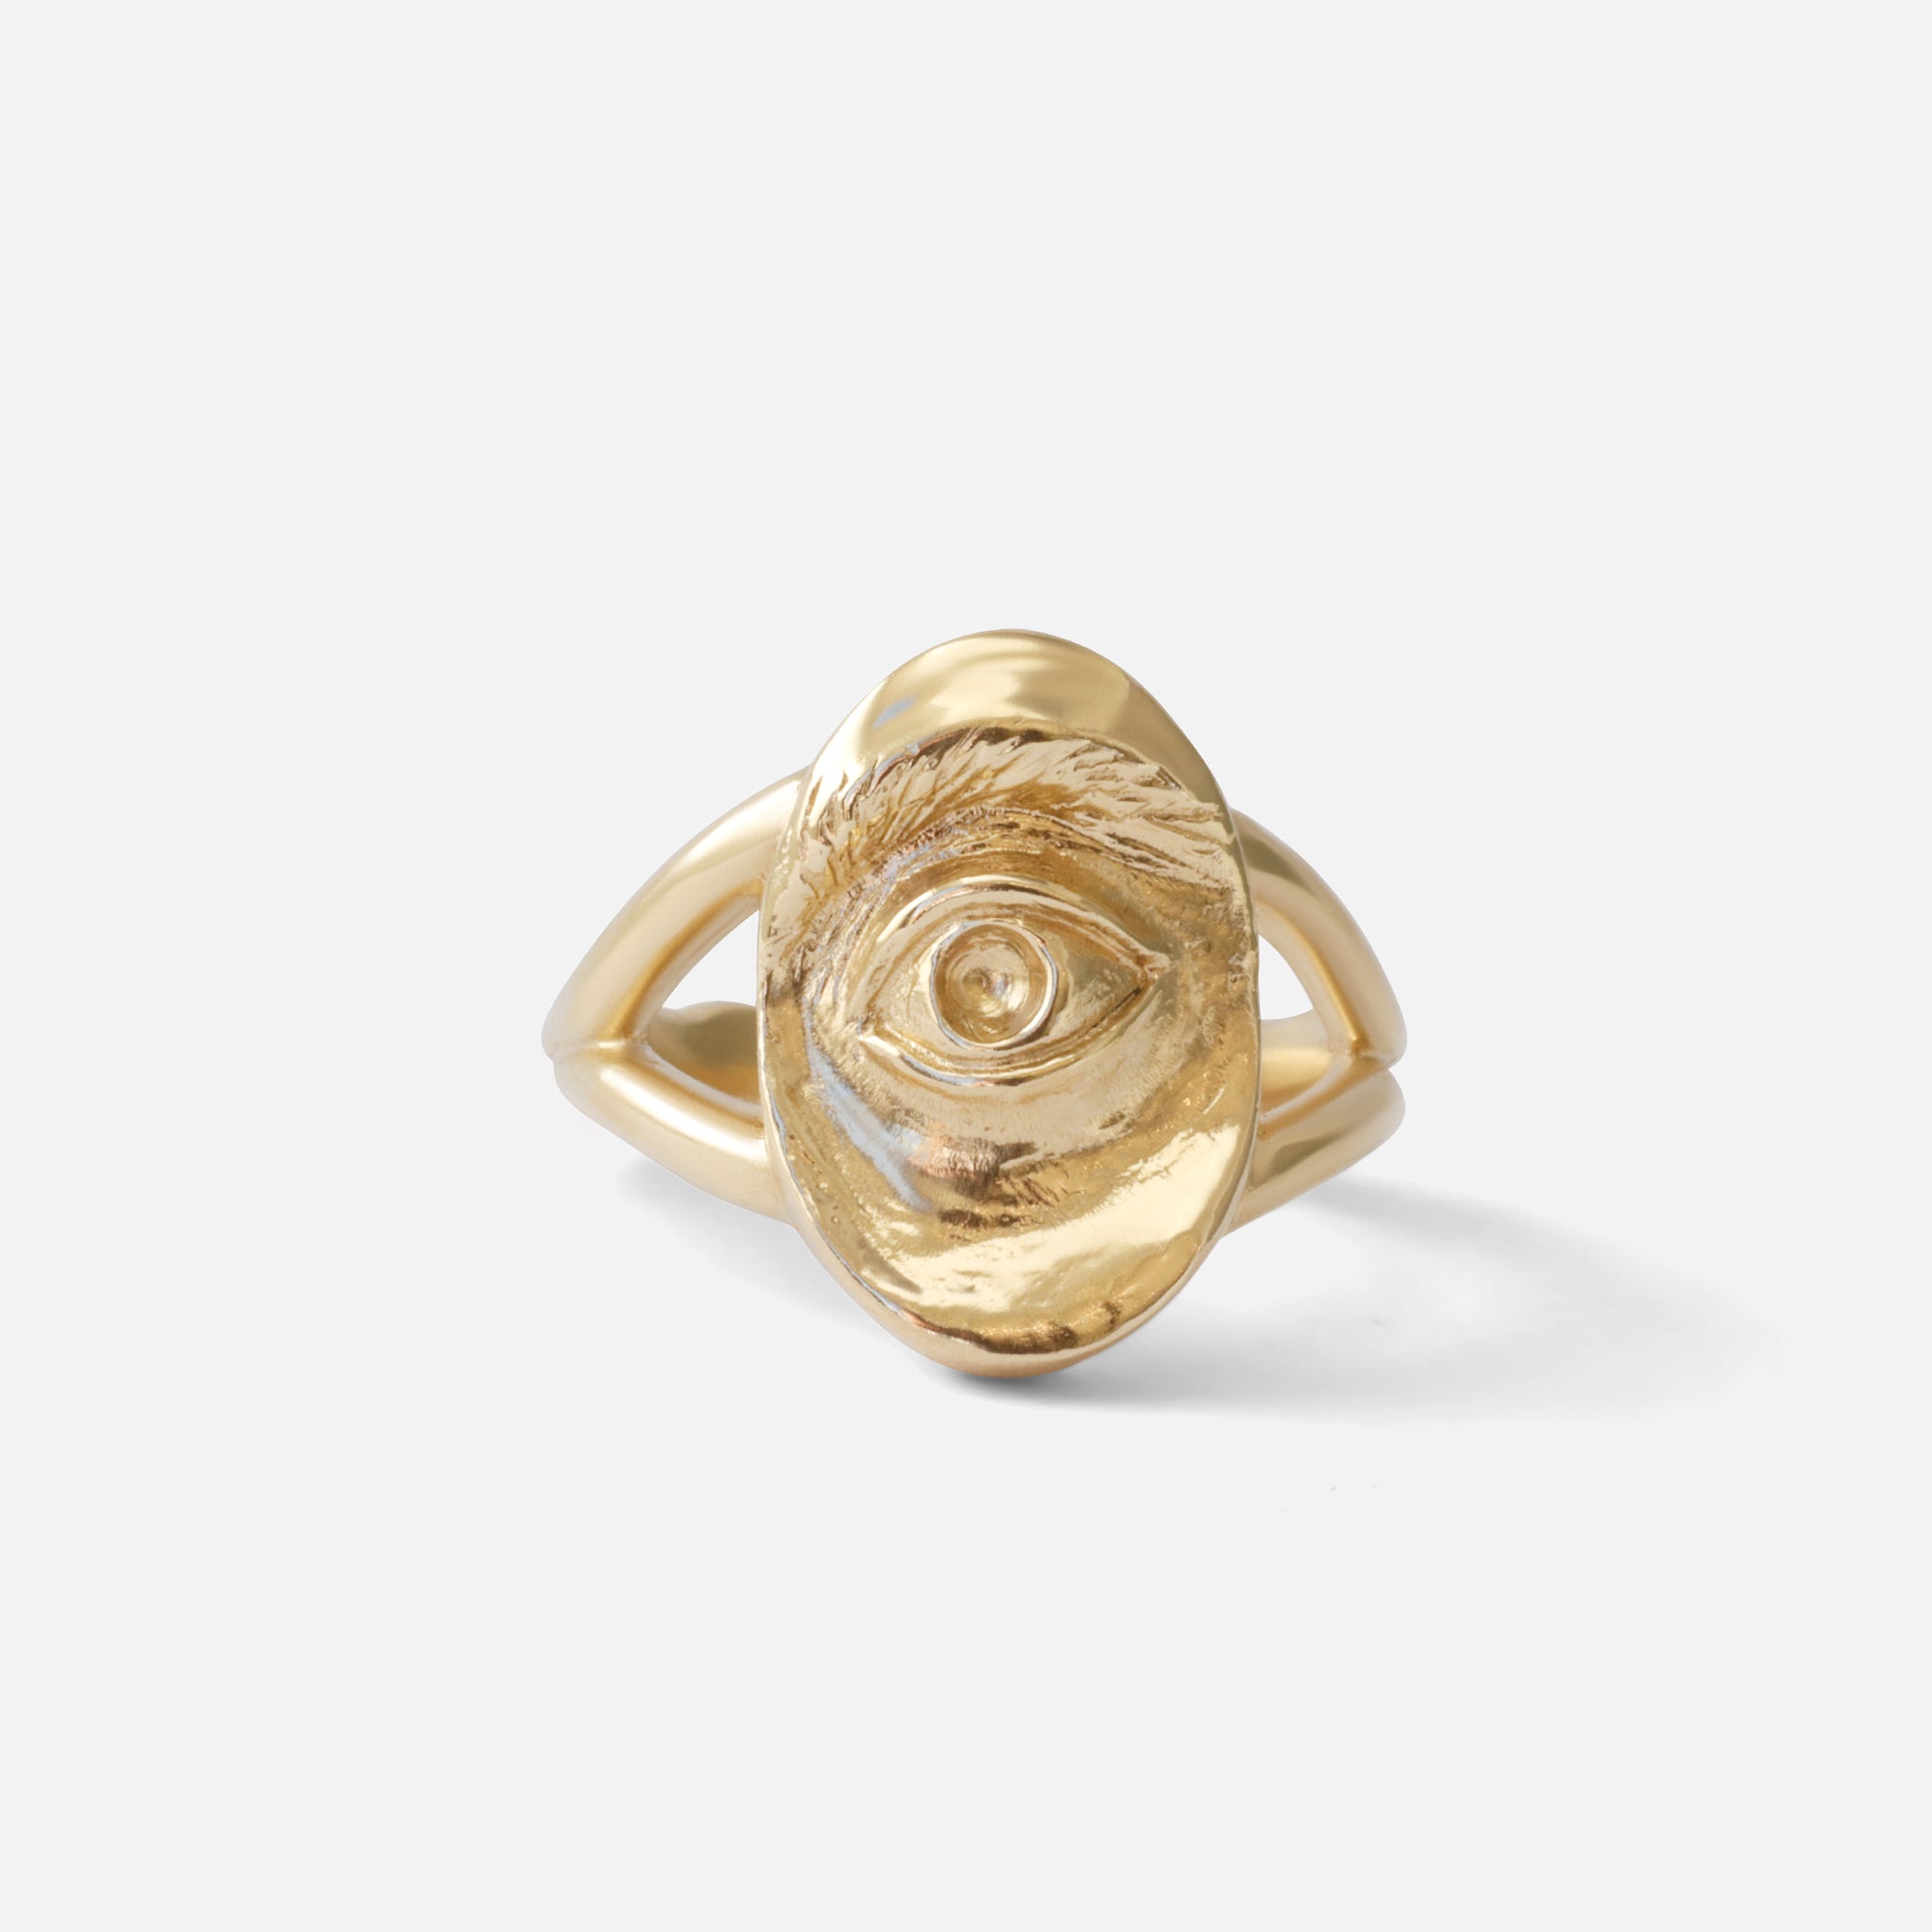 Intagliaux Oval / Ring By Alfonzo in rings Category